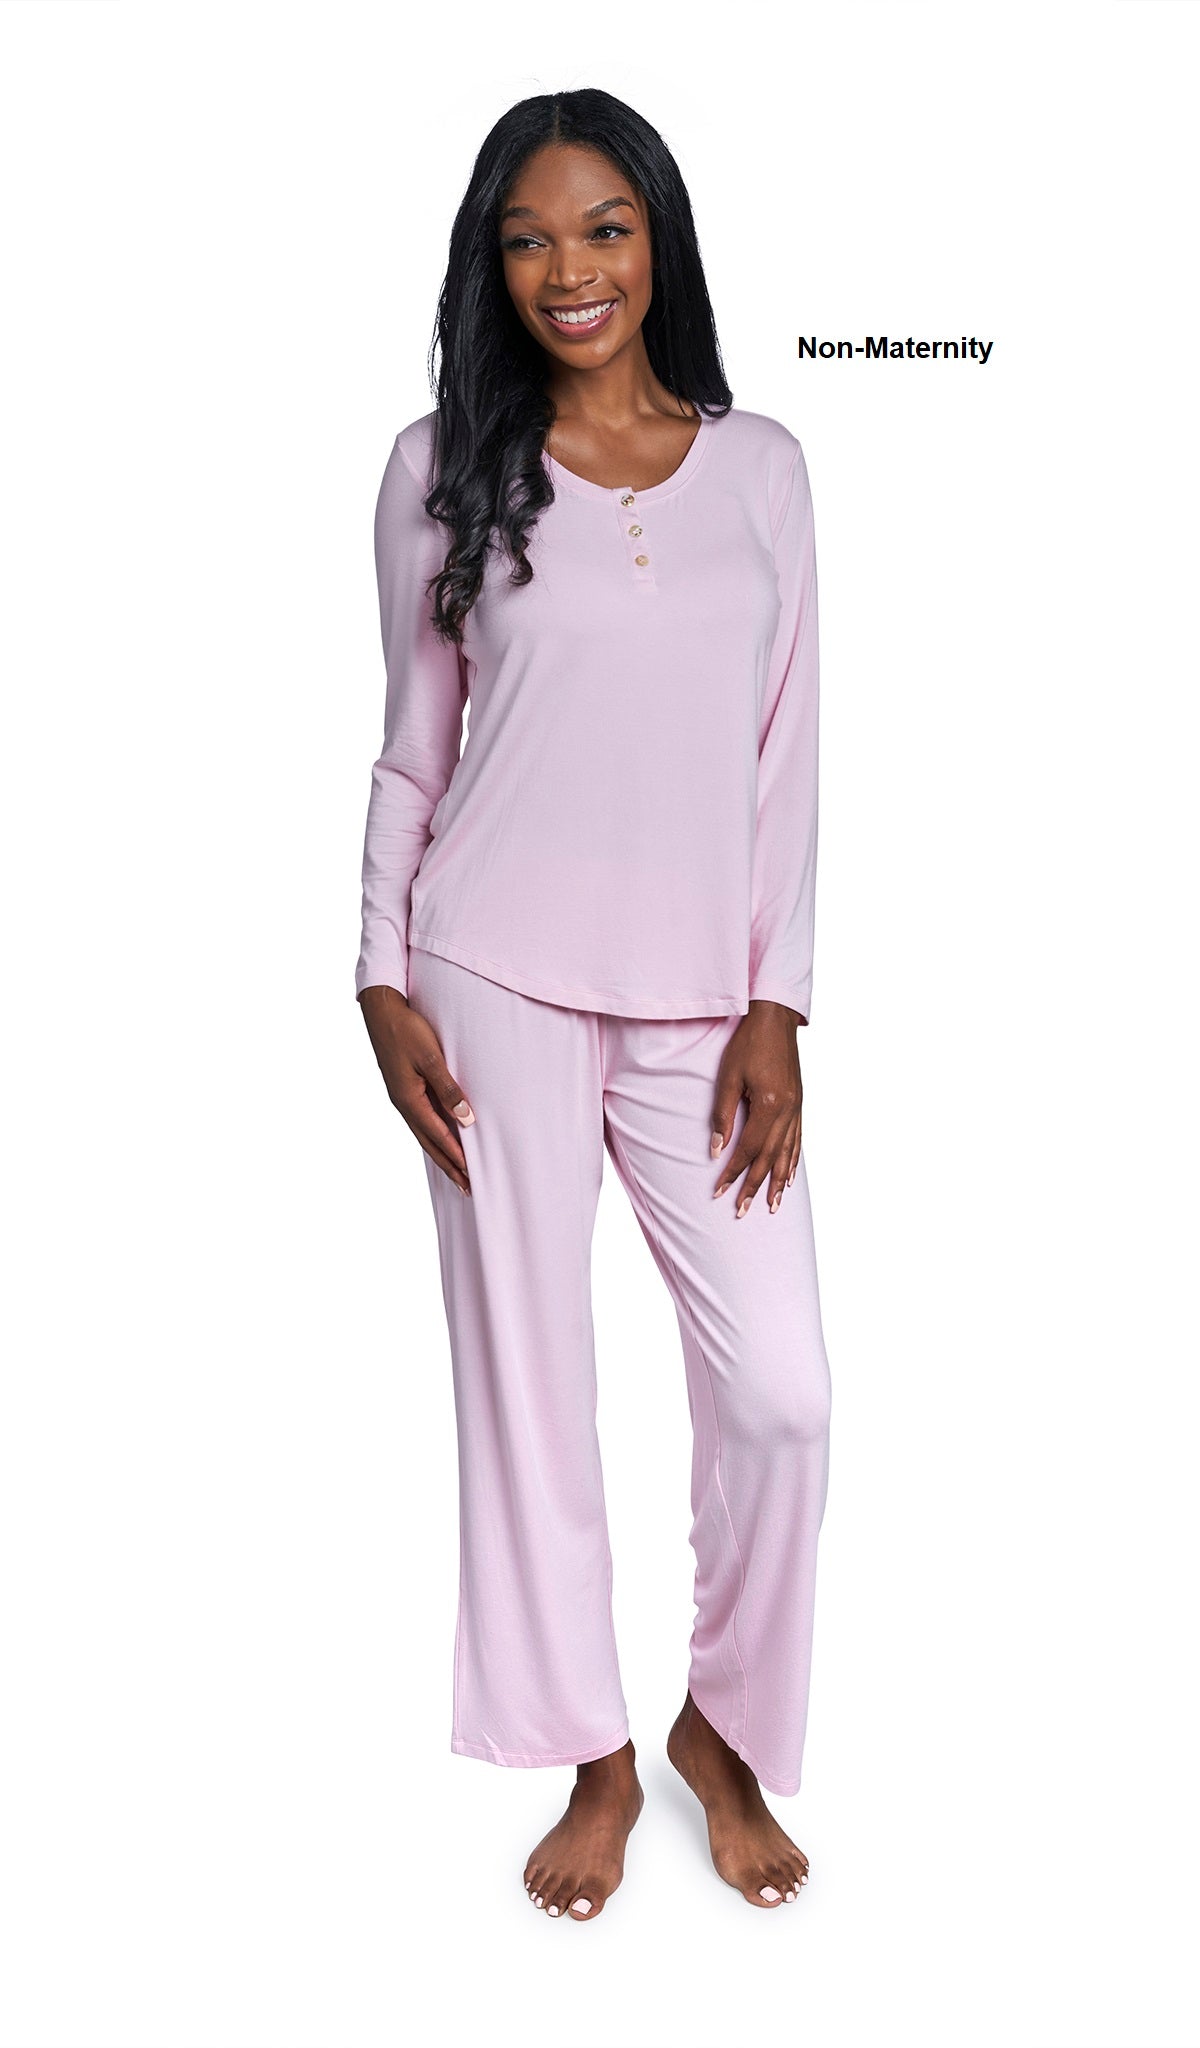 Blush Laina 2-Piece Set. Woman wearing button front placket long sleeve top and pant as non-maternity with hands to side.